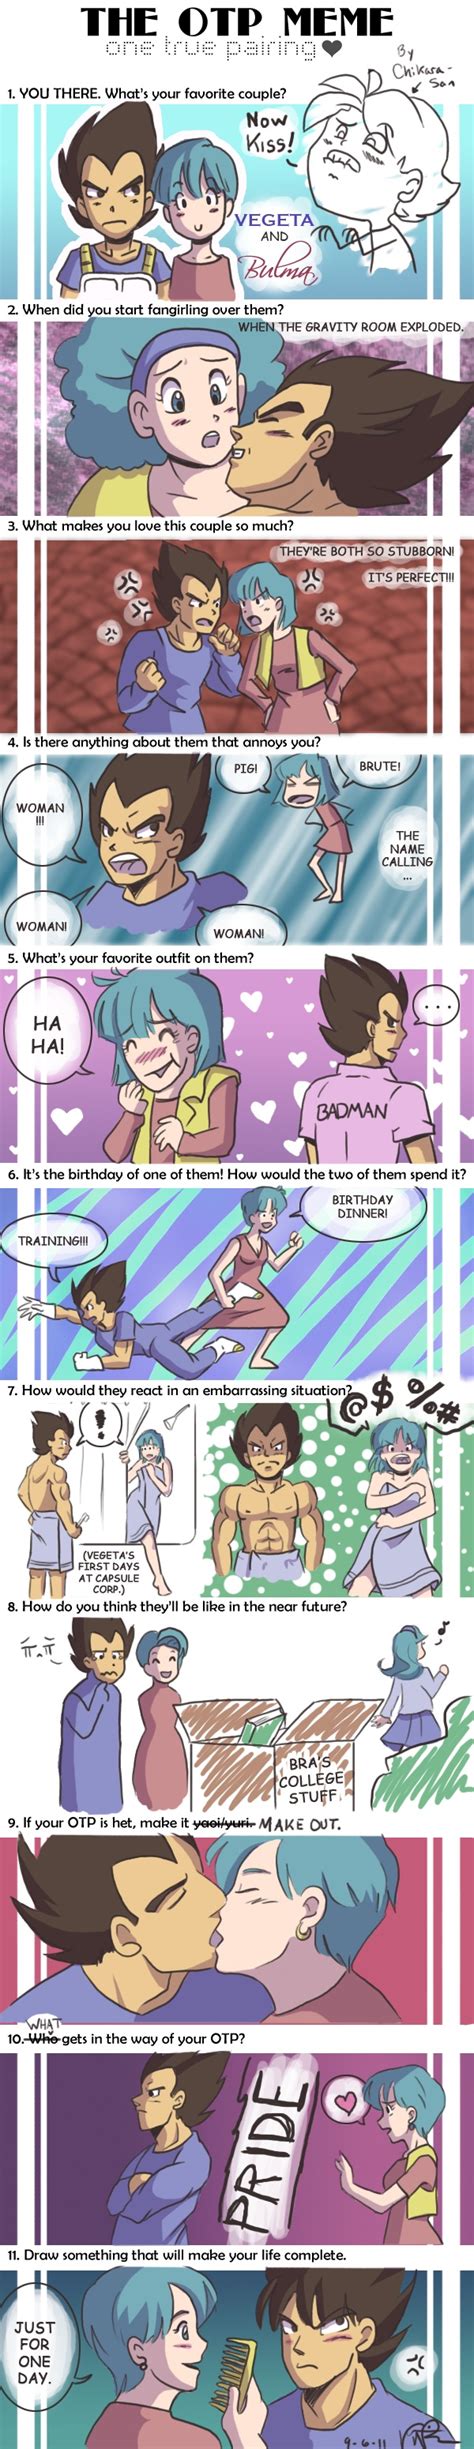 chi s otpmeme bulma and vegeta by lauradoodles on deviantart